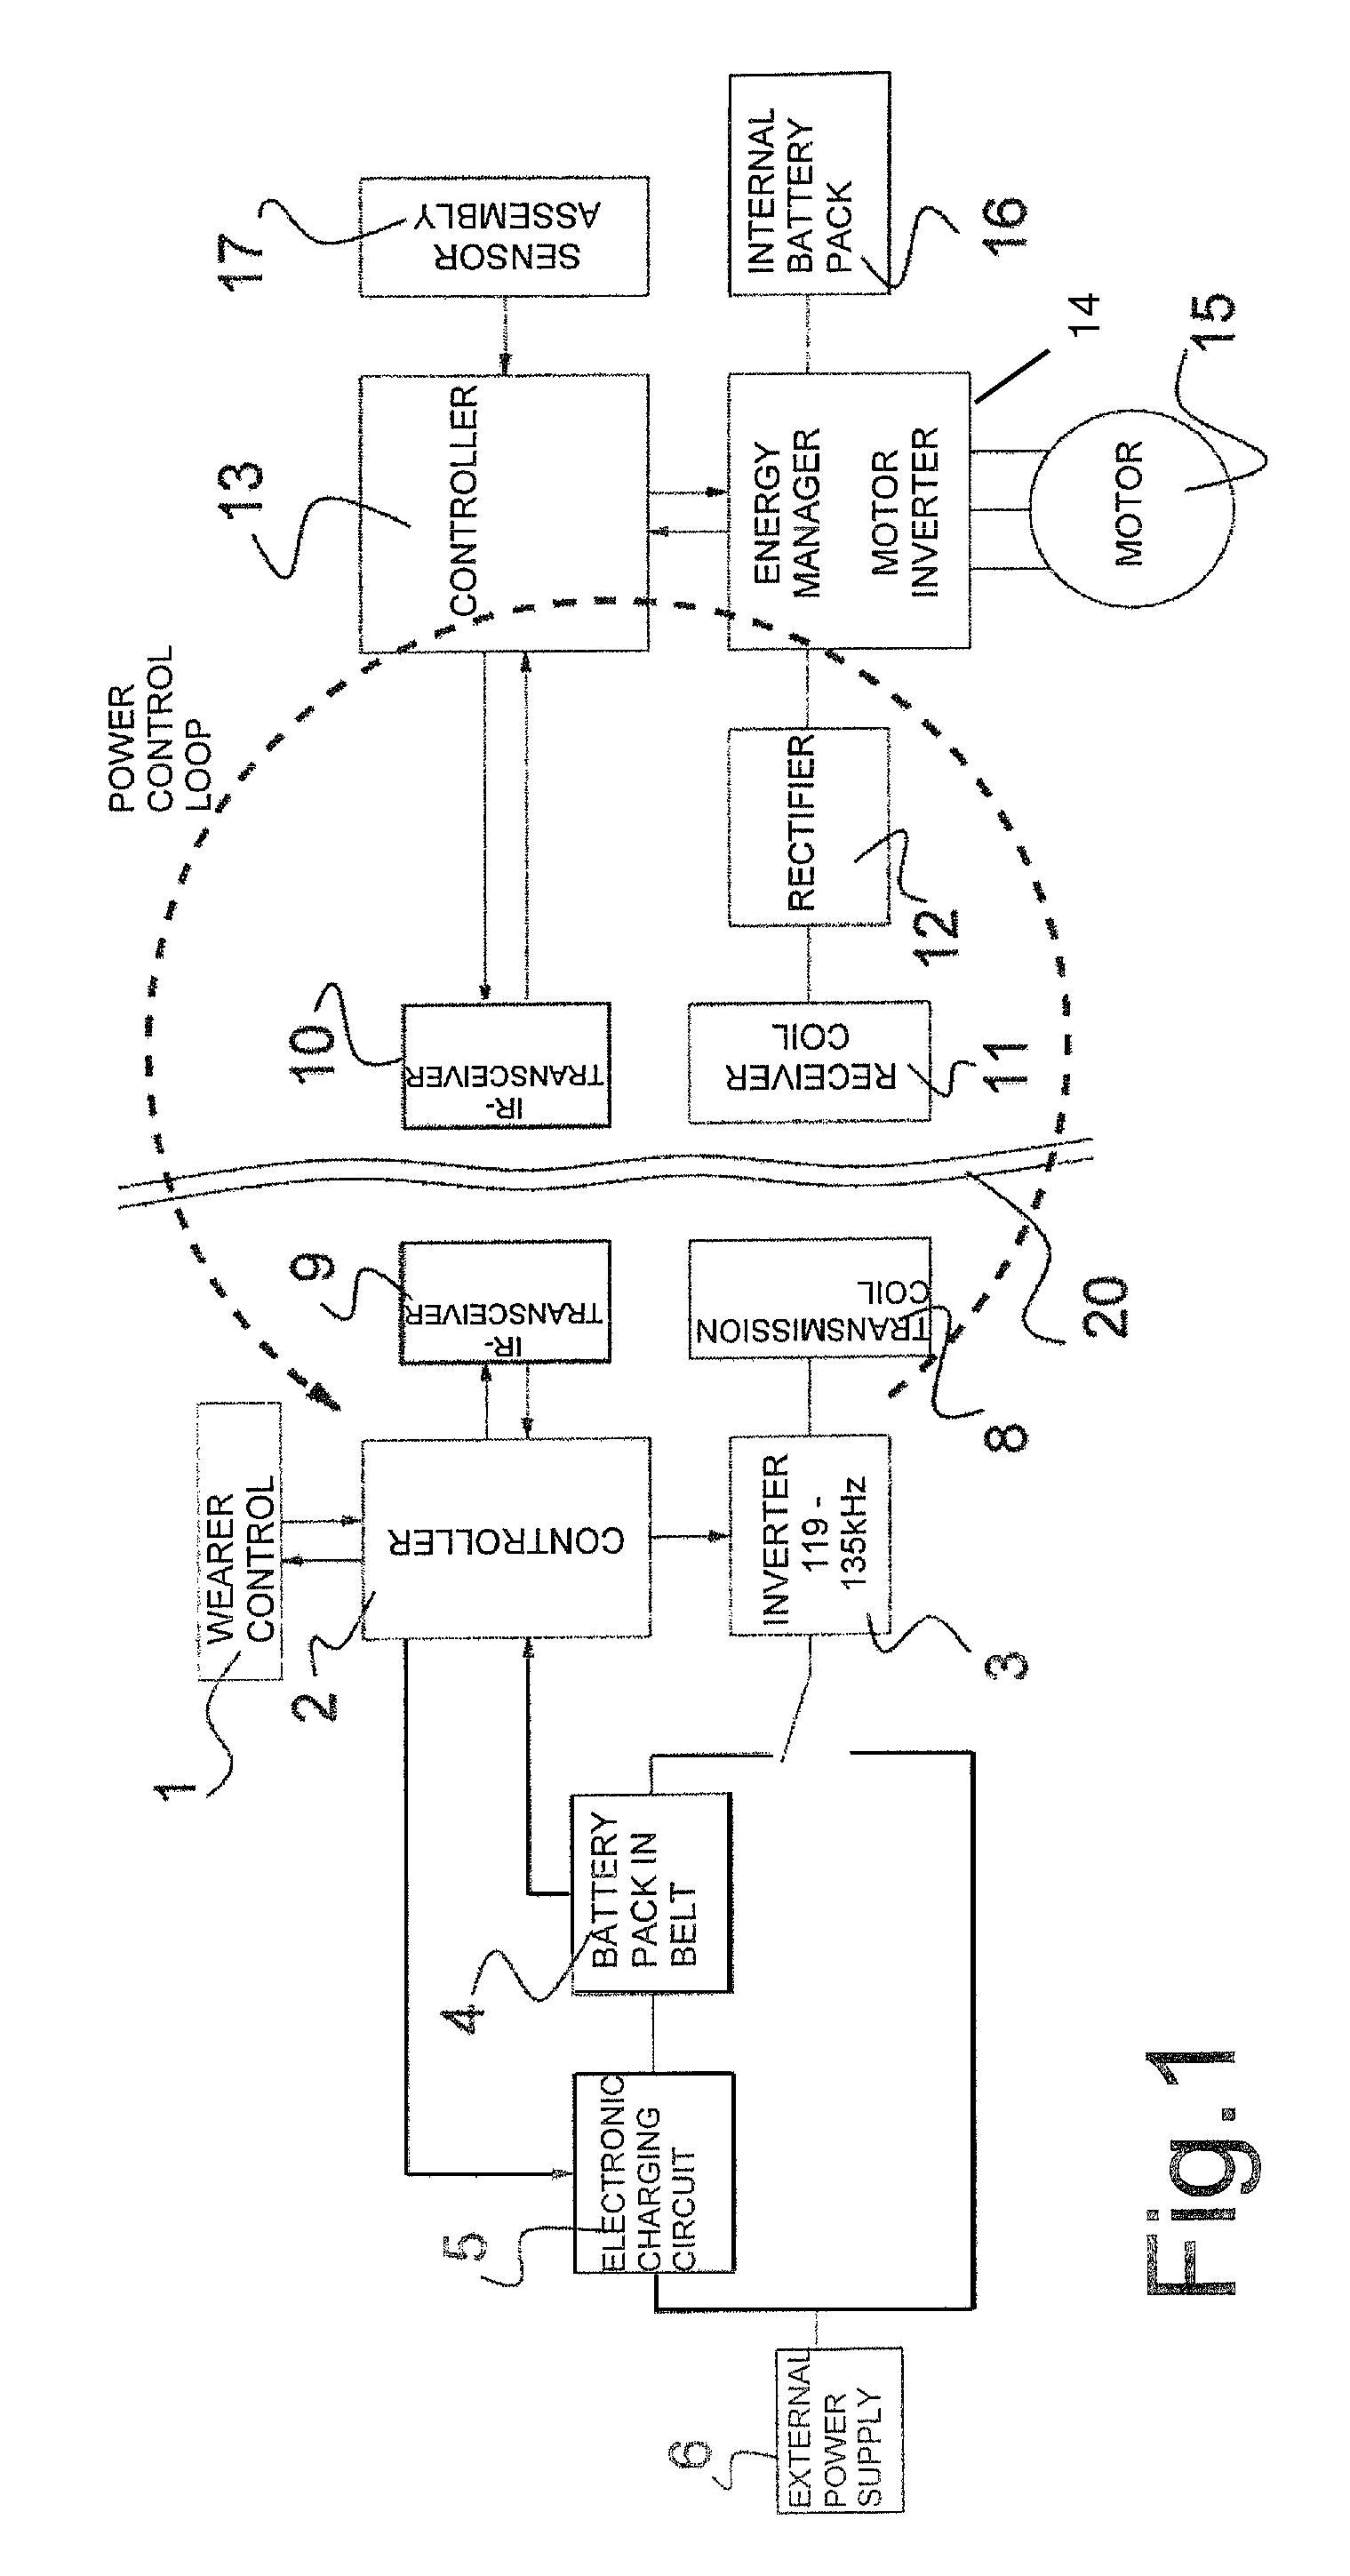 Assembly for wireless energy communication to an implanted device